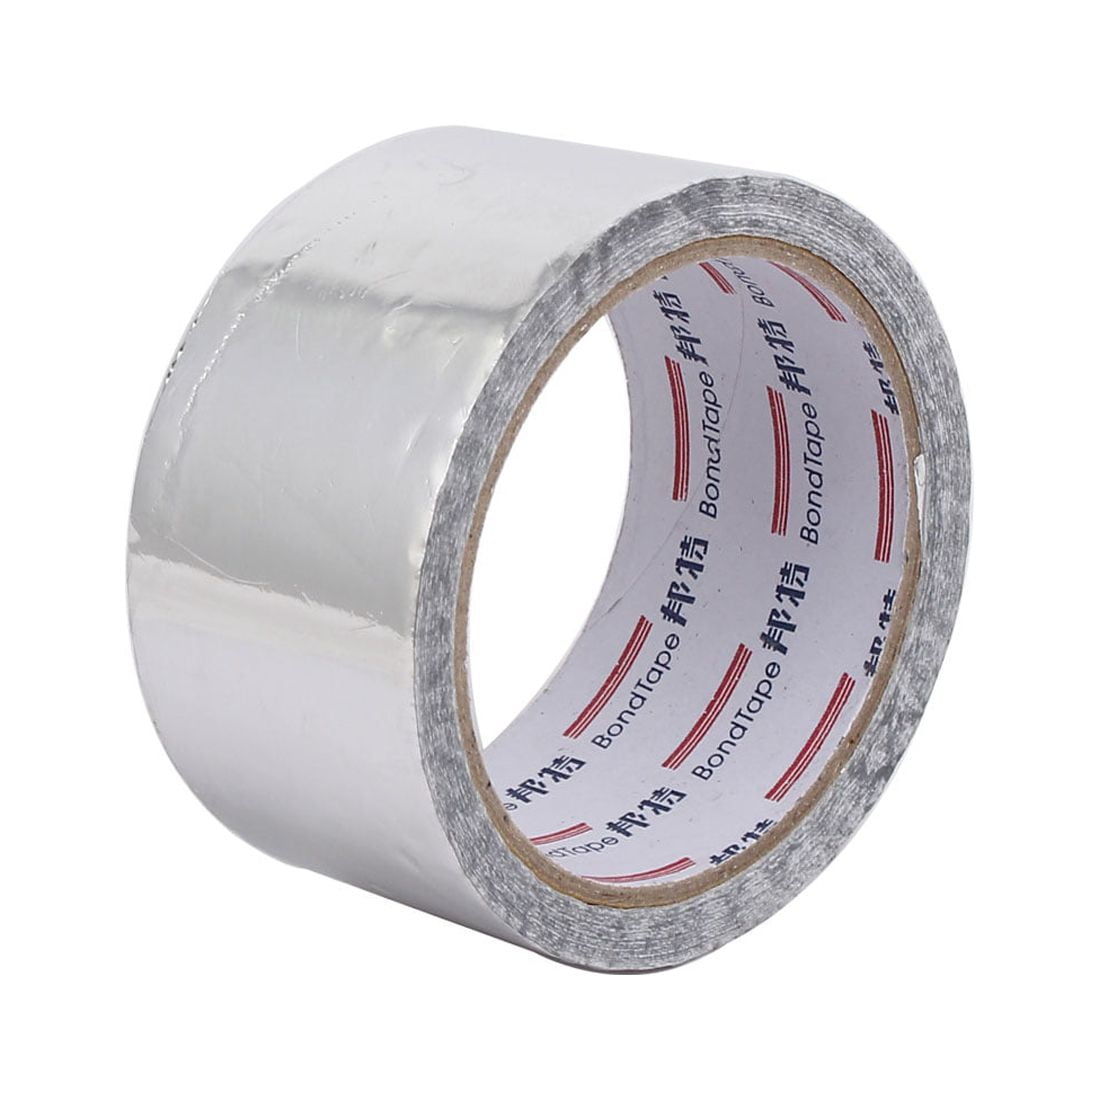 GTSE Wide Aluminum Foil Tape, 12 Rolls Bulk Contractors Pack, 4 Inches x 55 Yards (164 ft), Multi-Purpose Silver Metal Tape, Strong Adhesive, Full